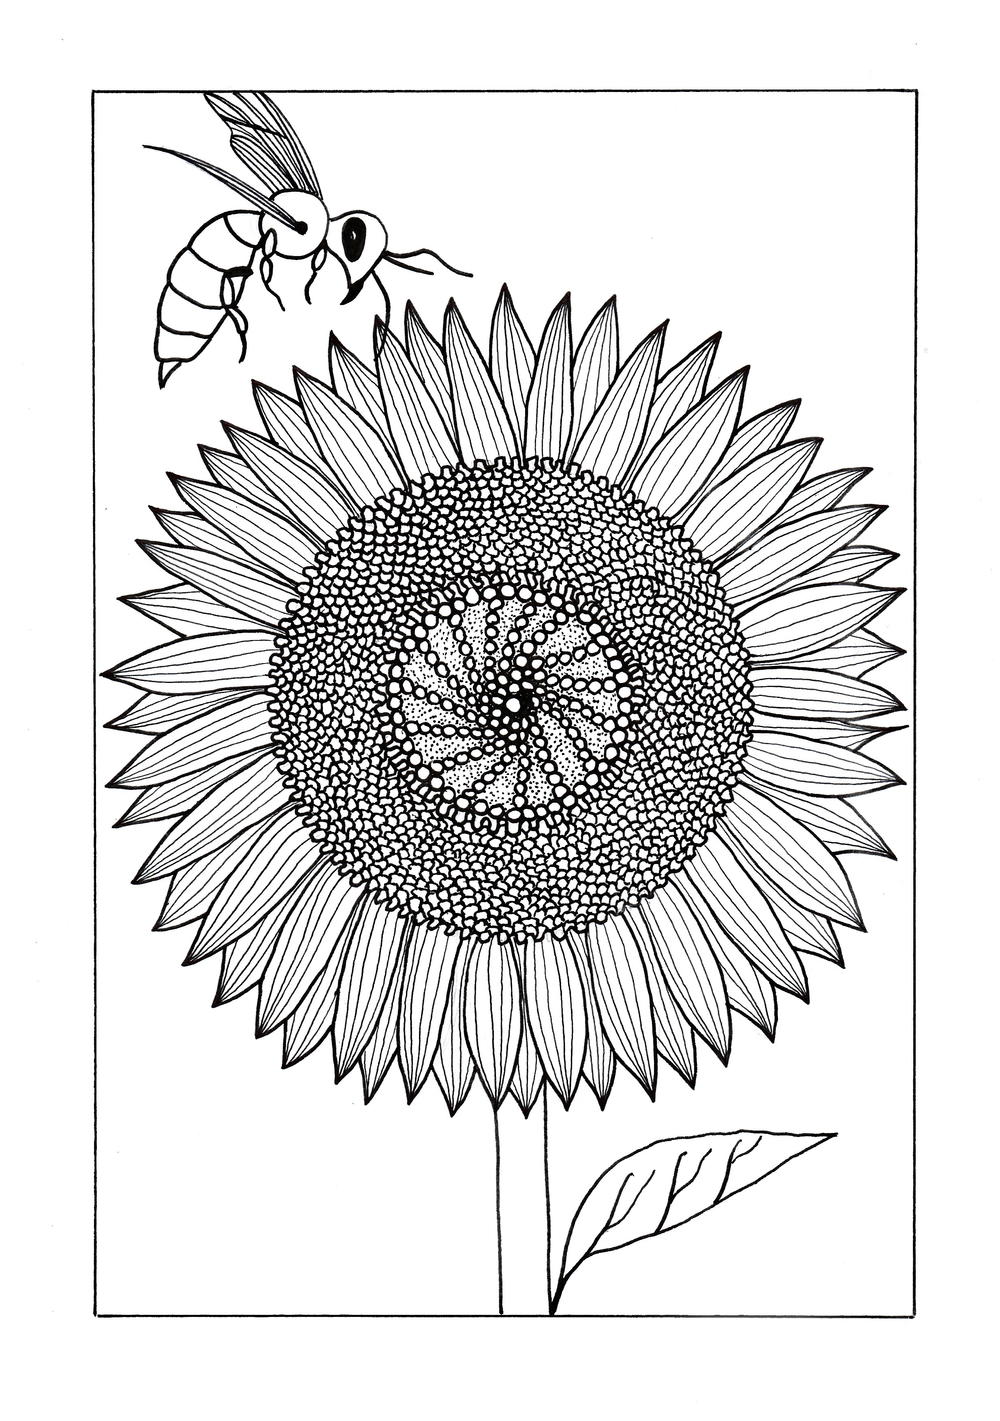 Download Vividly Intricate Sunflower Adult Coloring Page | FaveCrafts.com